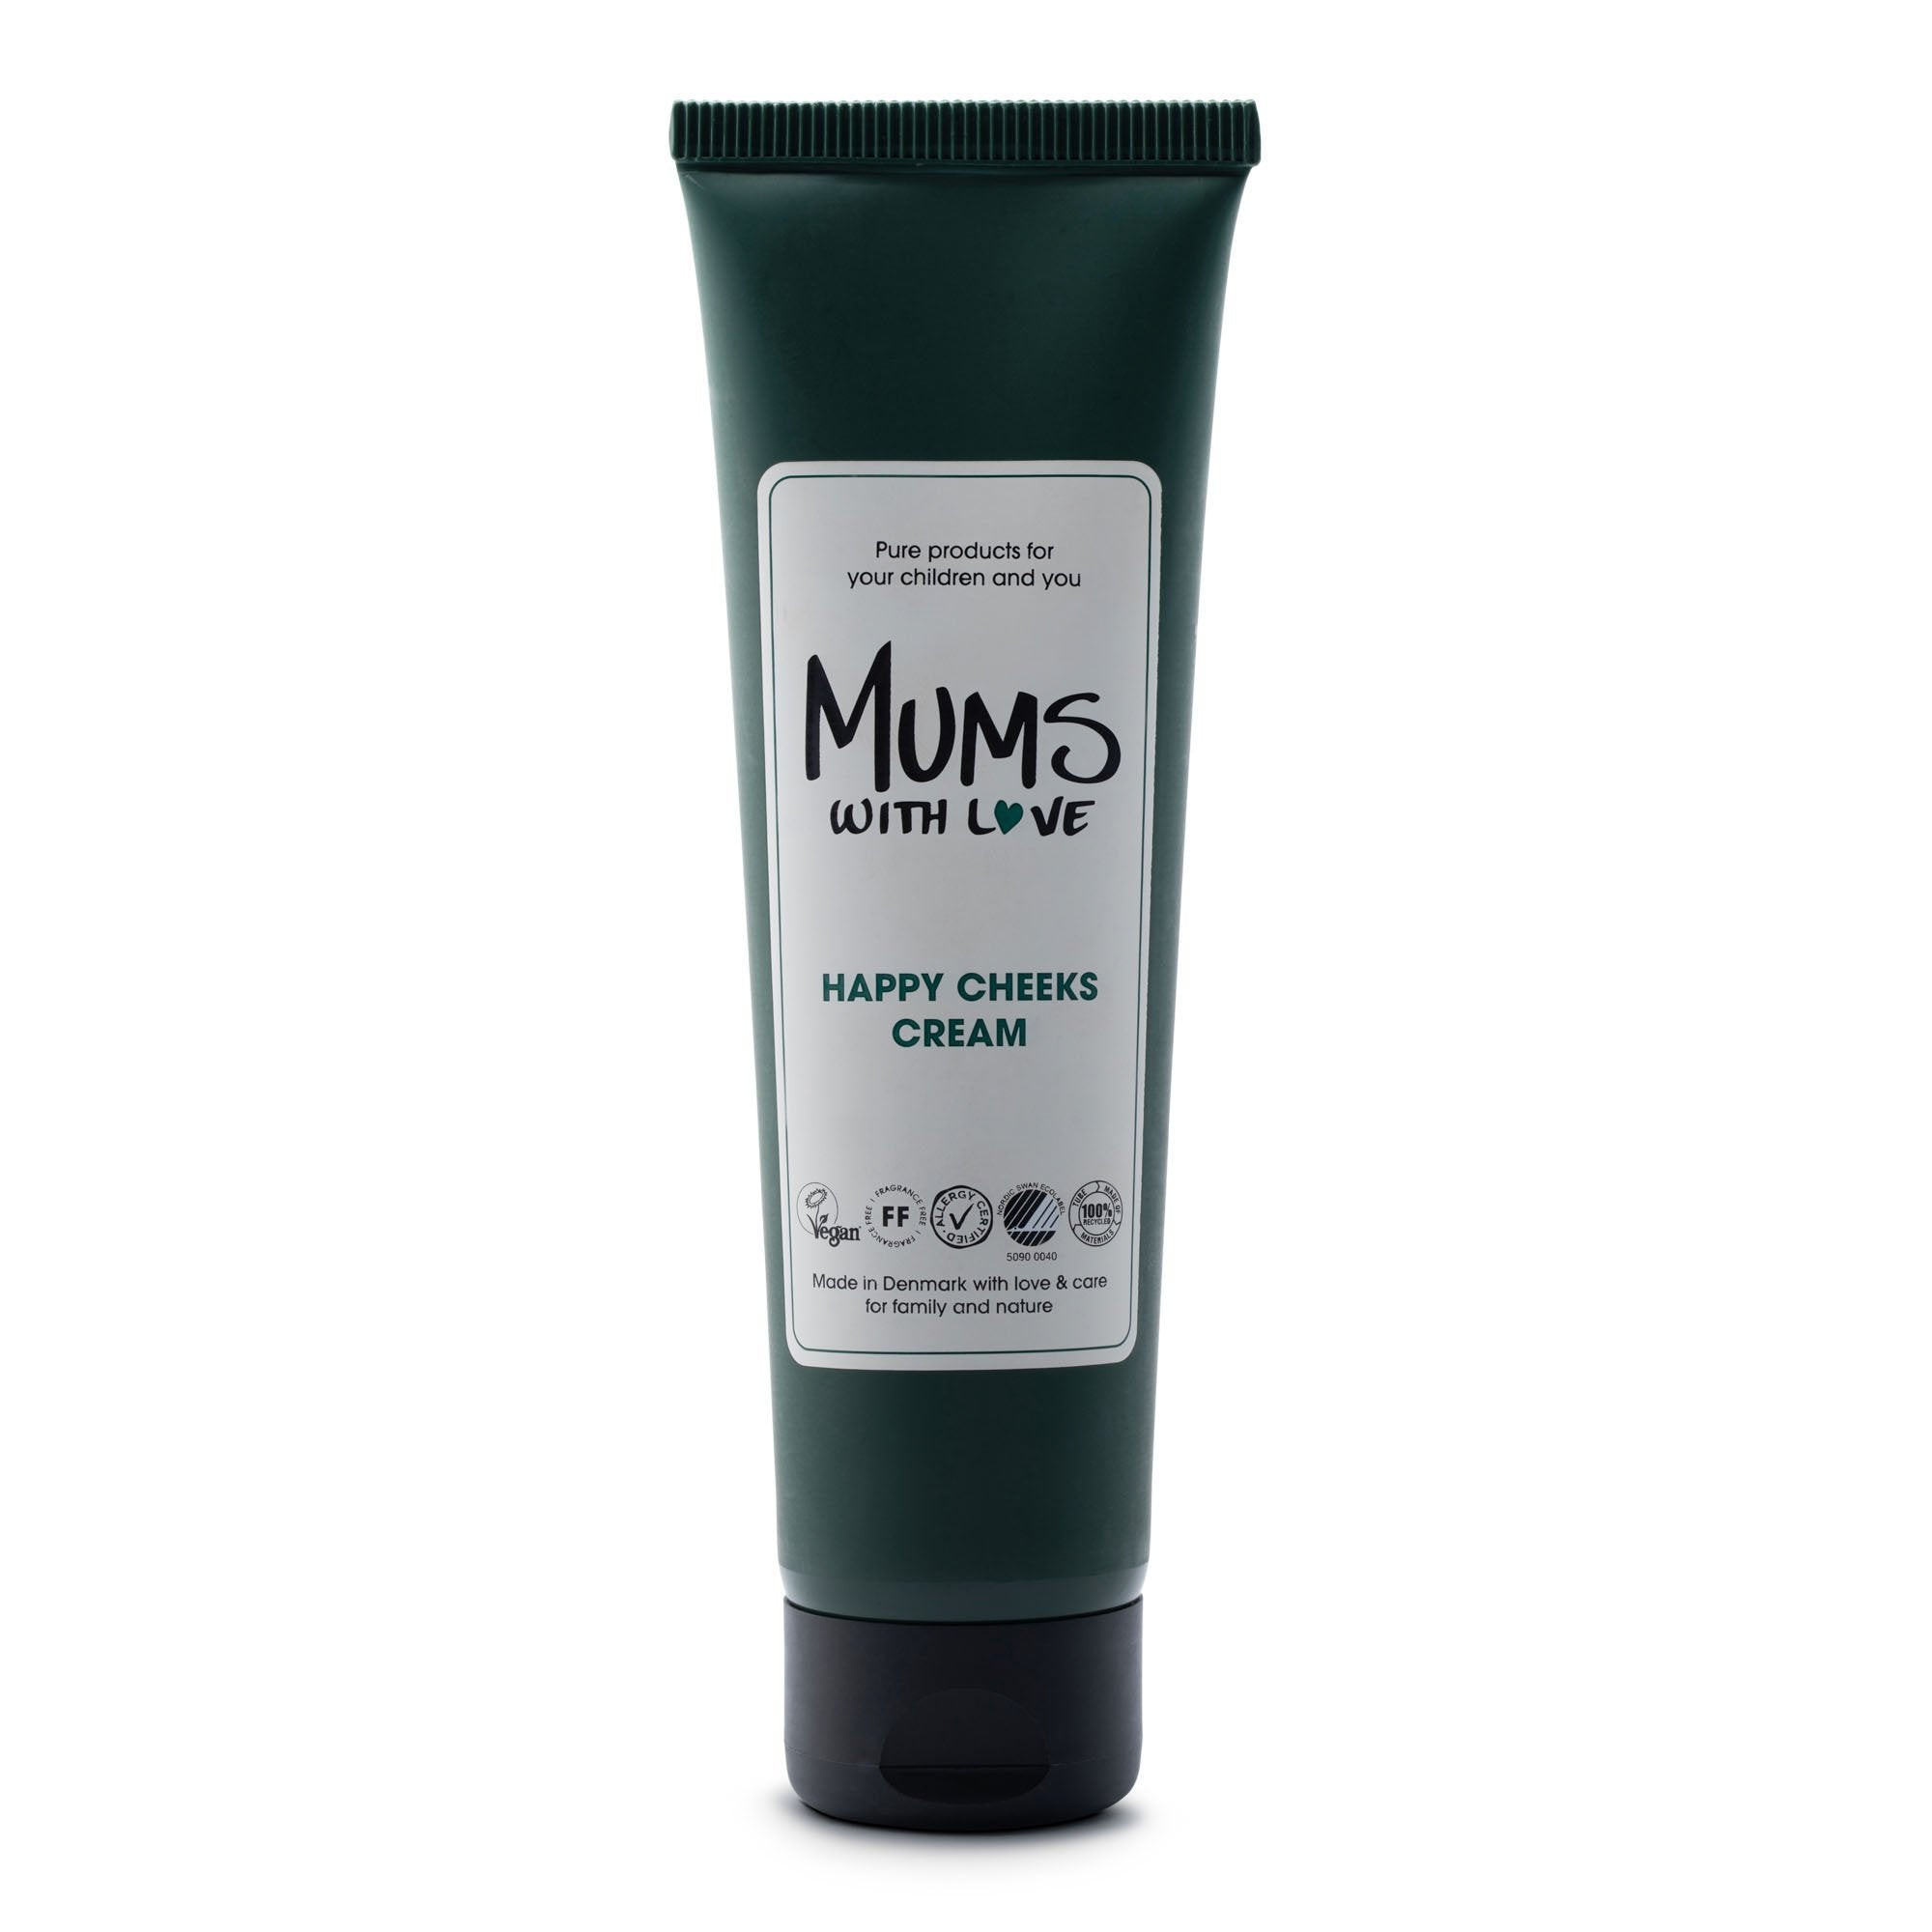 MUMS WITH LOVE - HAPPY CHEEKS CREAM 100 ml  MUMS WITH LOVE   